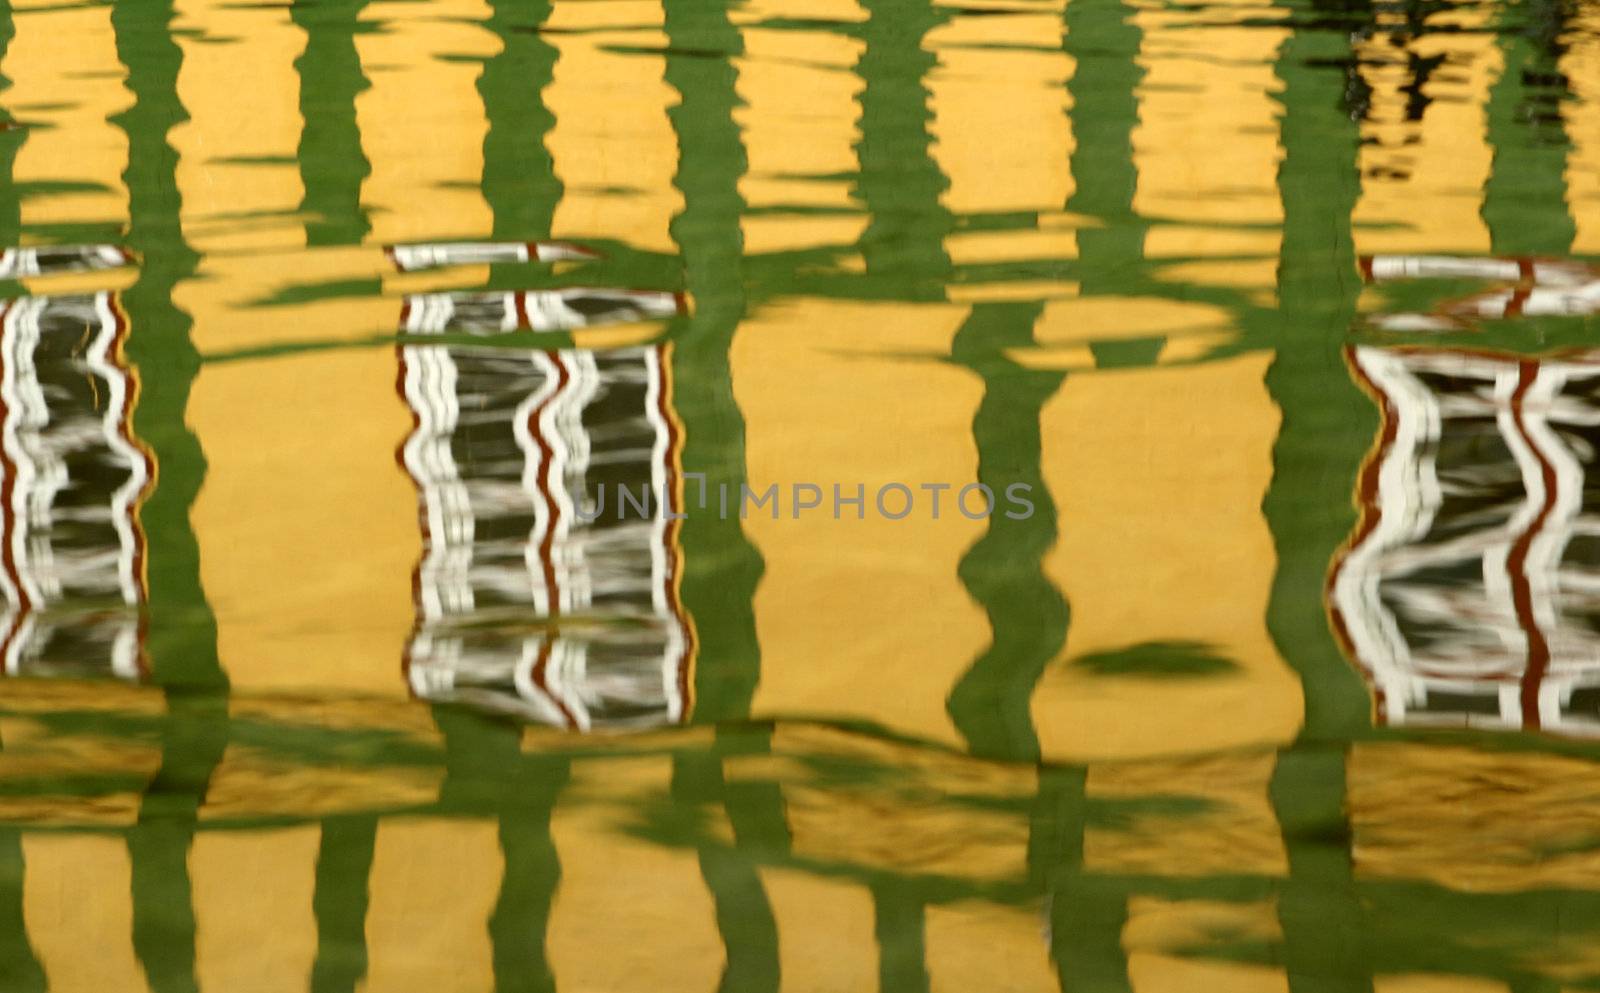 reflection in the water in the street of a danish village in grenaa in the summer(half timbered house)